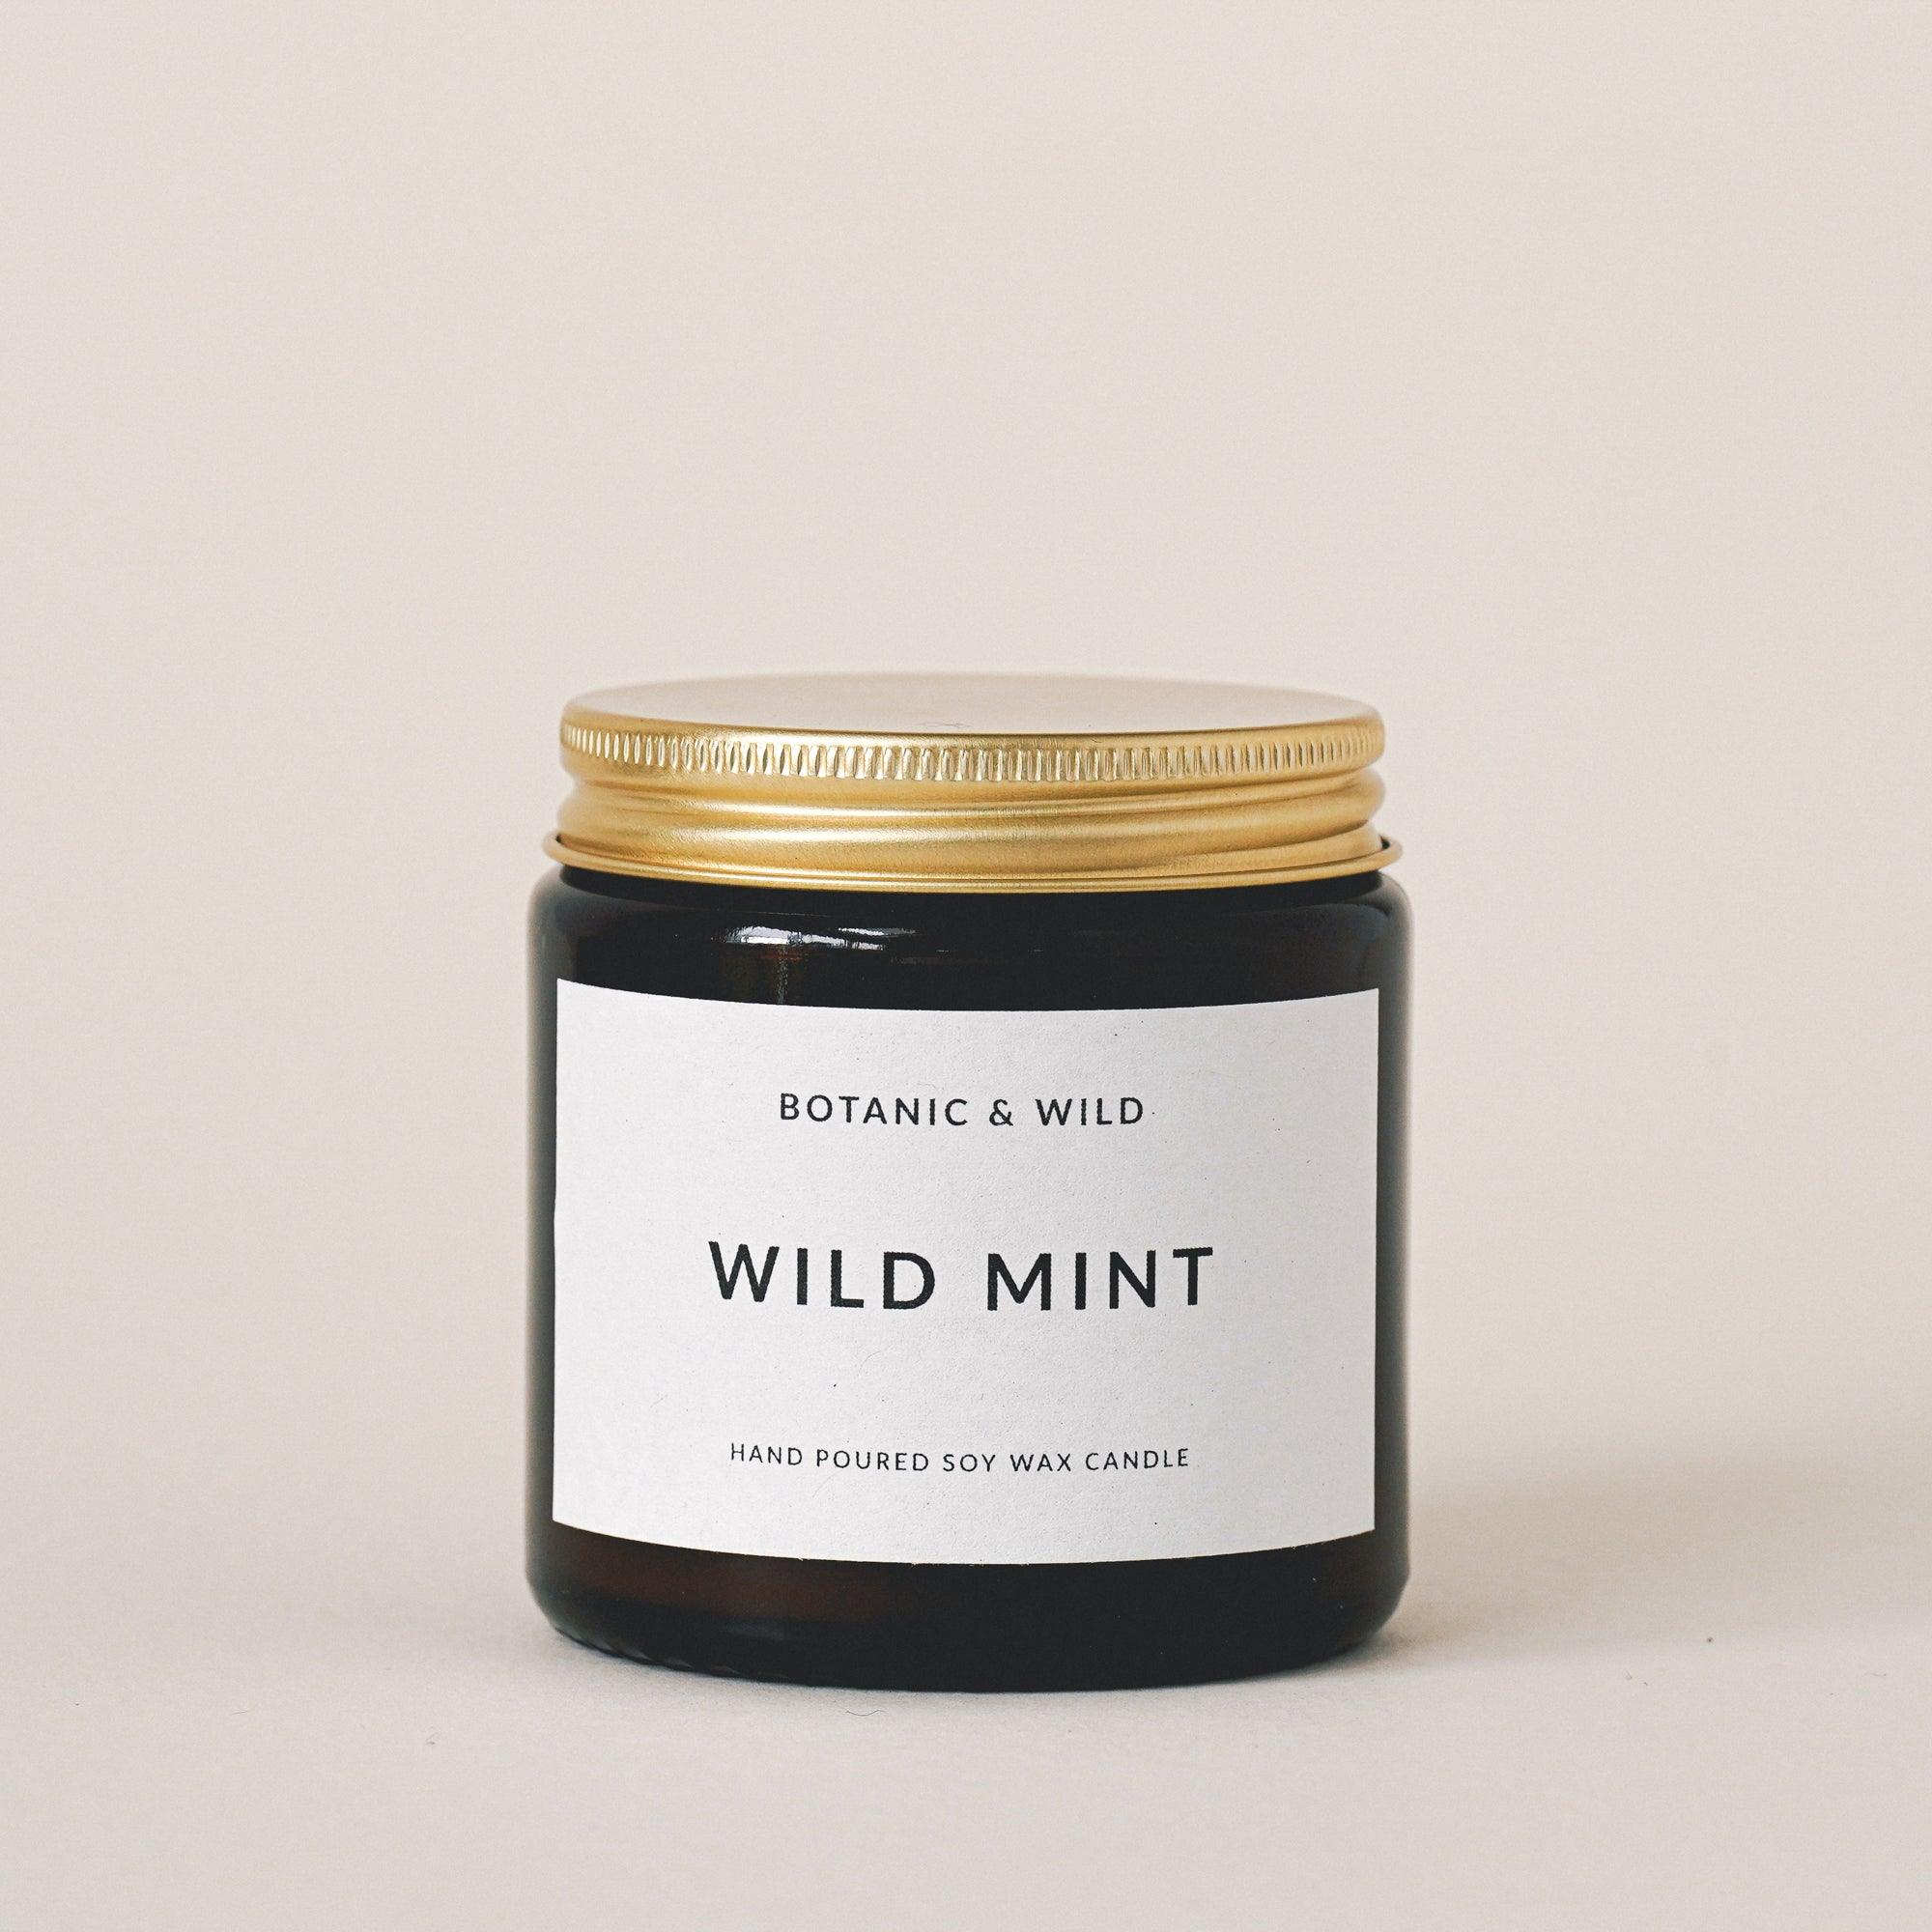 WILD MINT Scented Soy Candles - Botanic & Wild